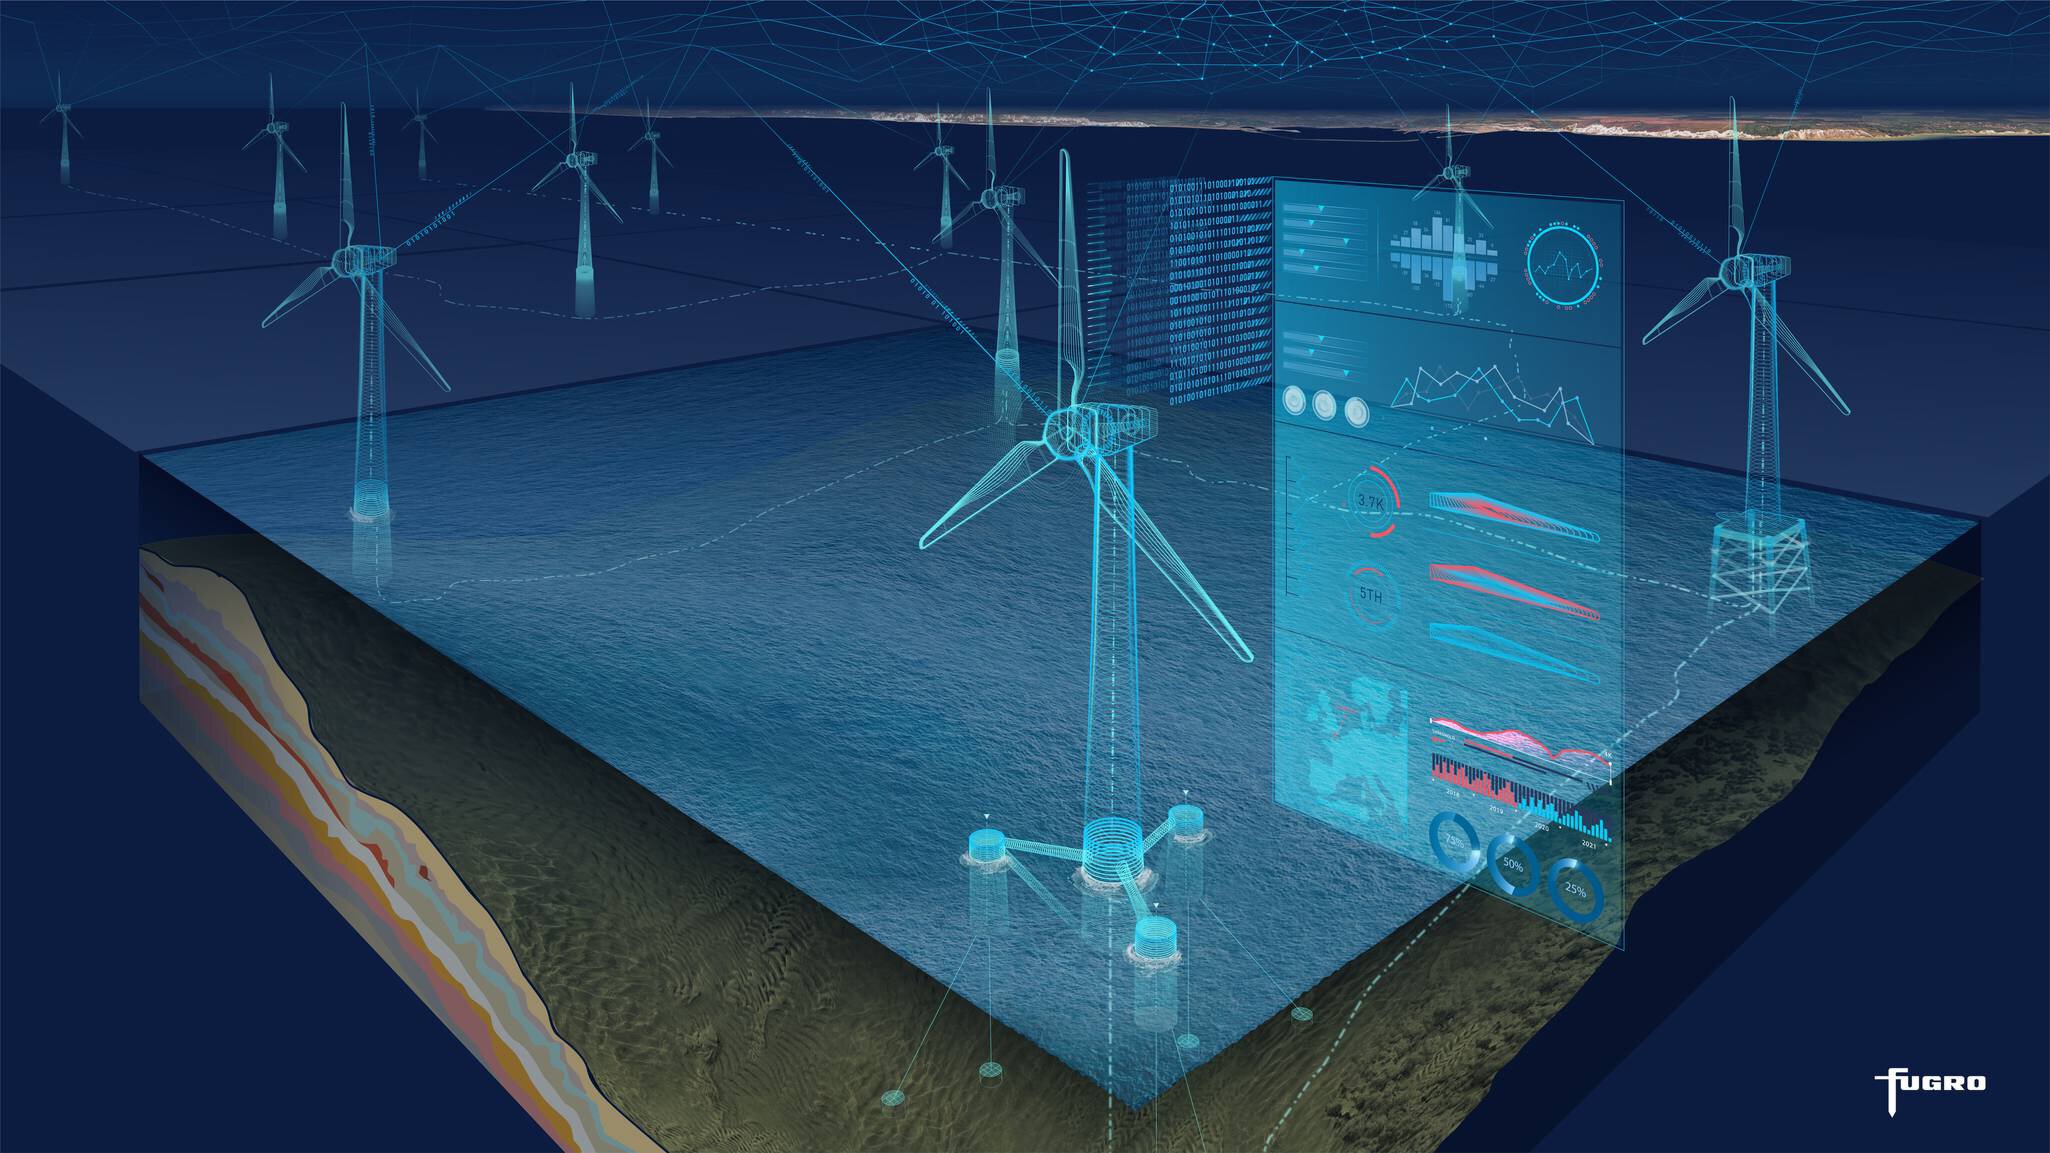 Our bespoke structural monitoring solutions also enable real-time and continuous integrity monitoring of assets to provide early indications of fatigue or element failure. Our Geo-data expertise allow the integration of all available data from site investigation to asset inspection and monitoring, into a 3D digital twin of your wind farm. This enables condition based and preventative maintenance systems to be implemented.